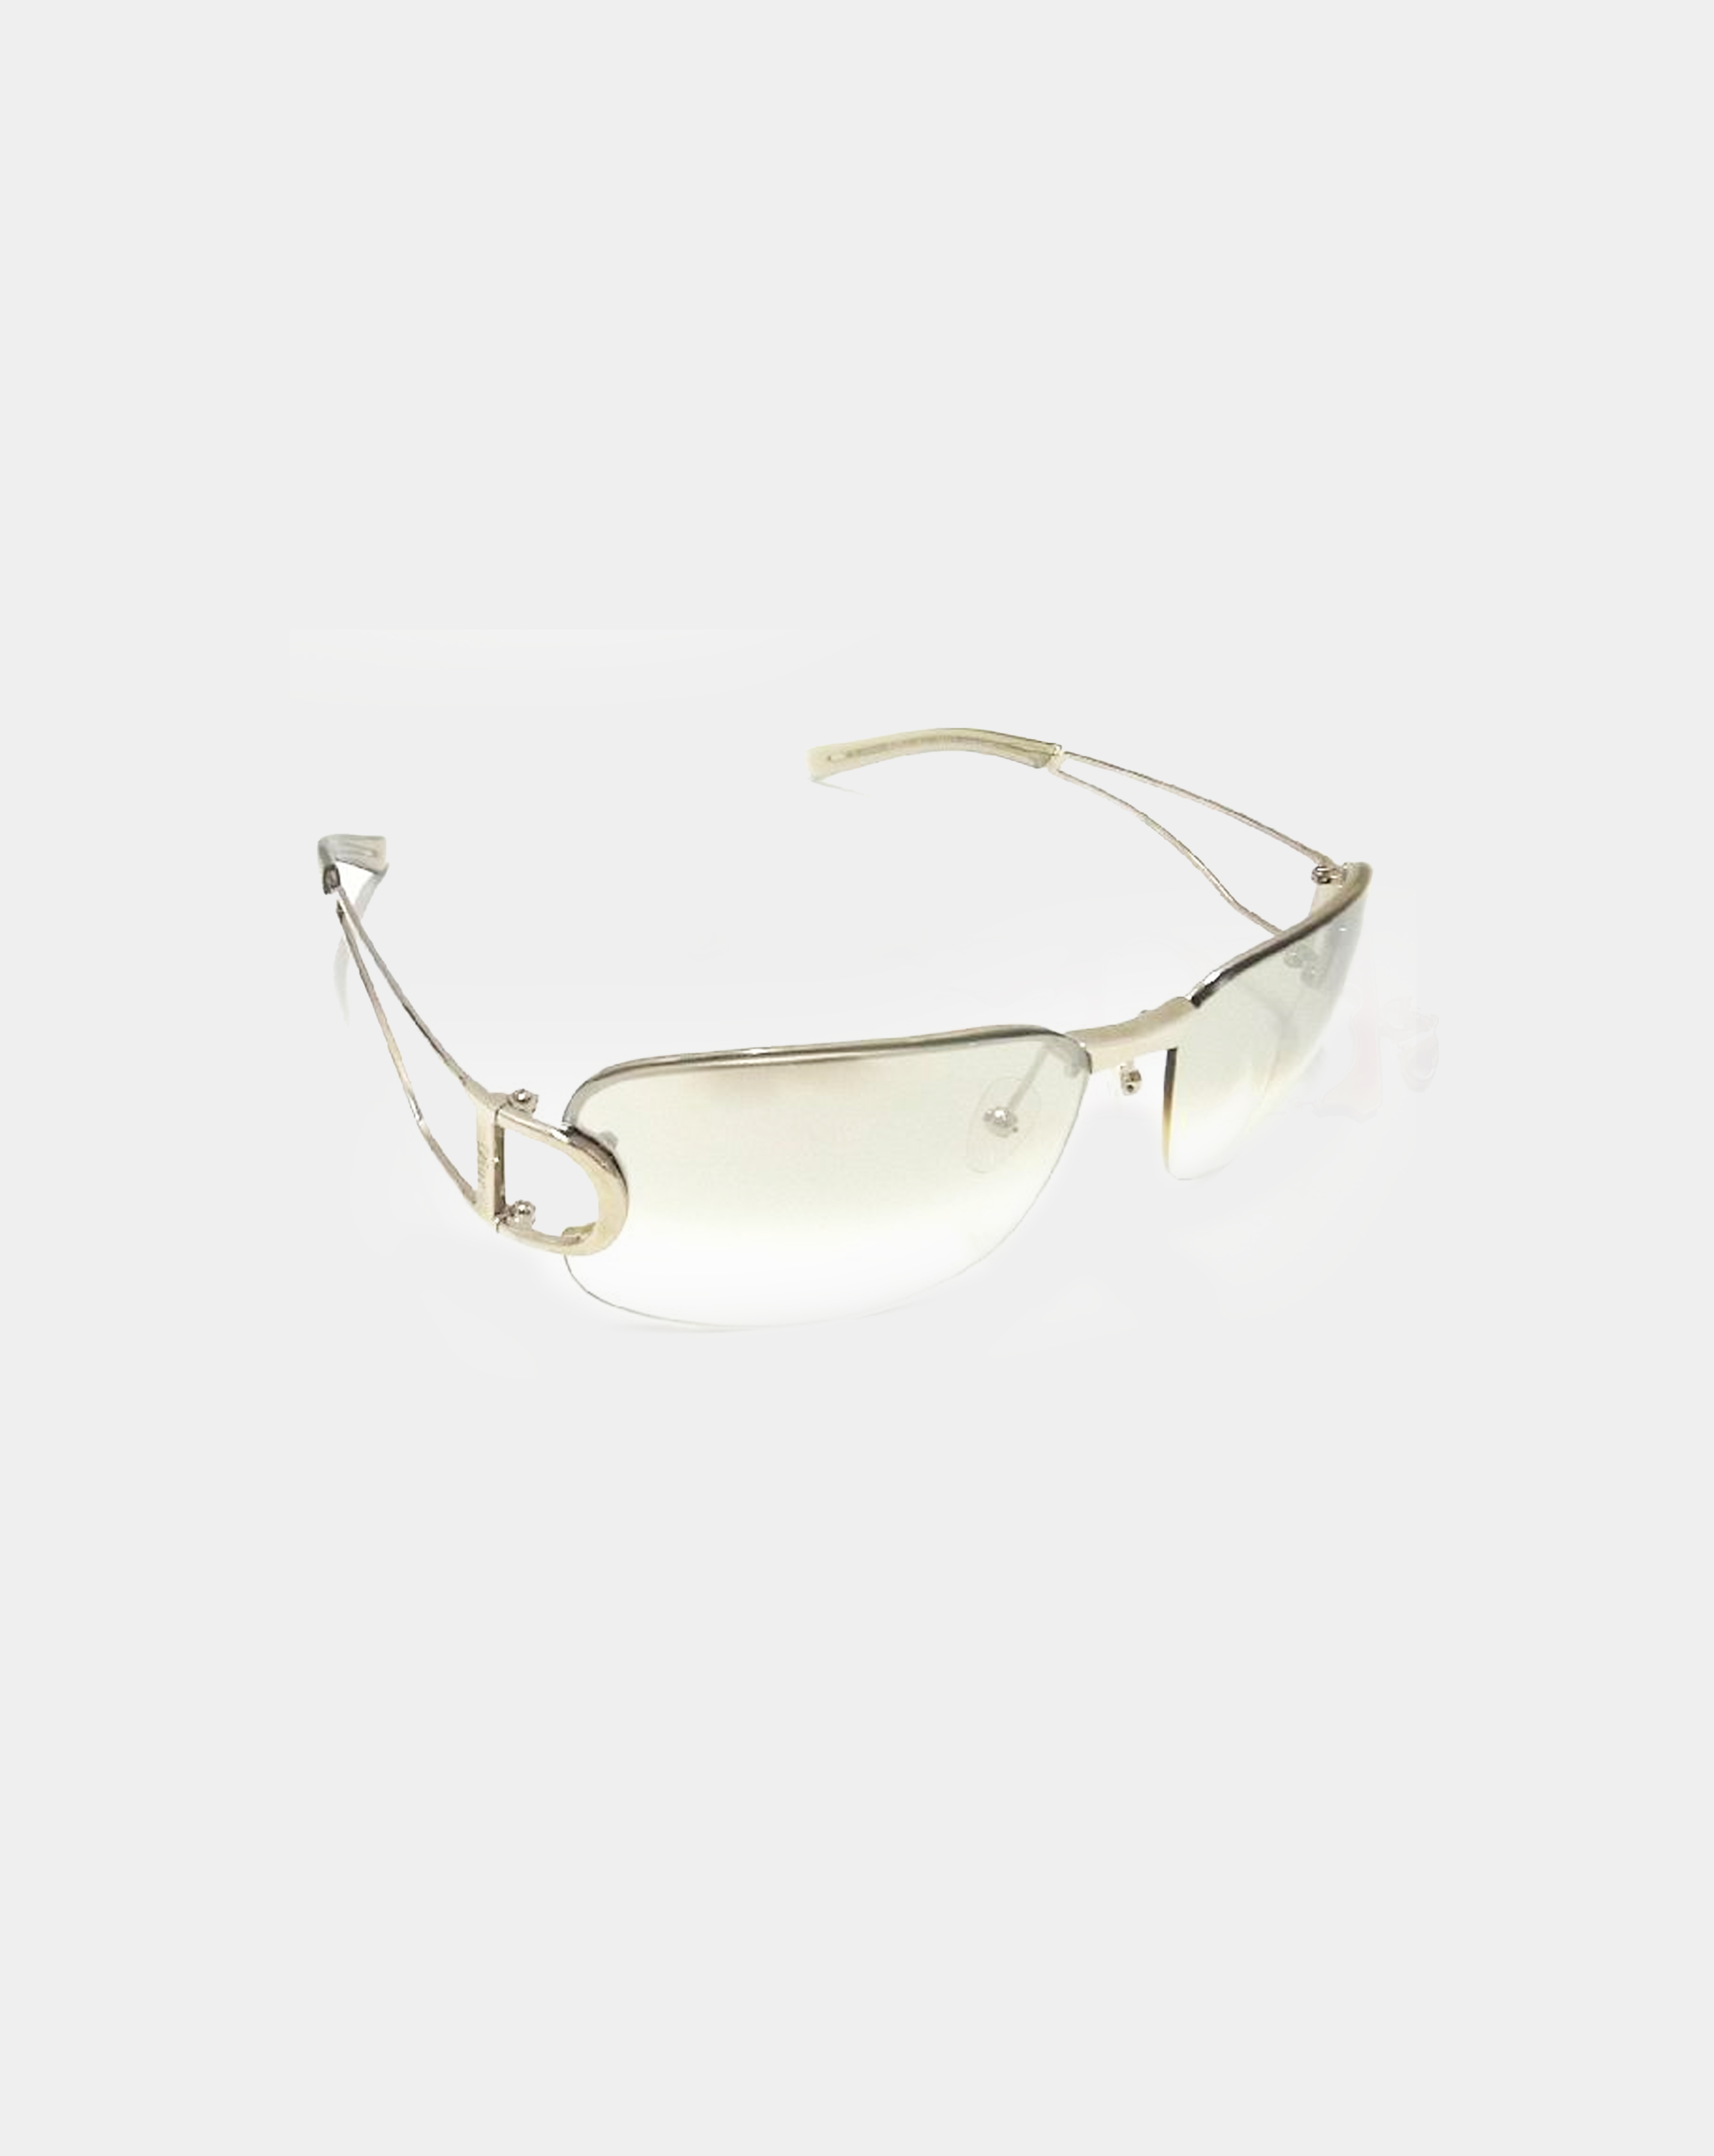 CHRISTIAN DIOR CRYSTAL FLAMES SUNGLASSES  The Archive Gallery